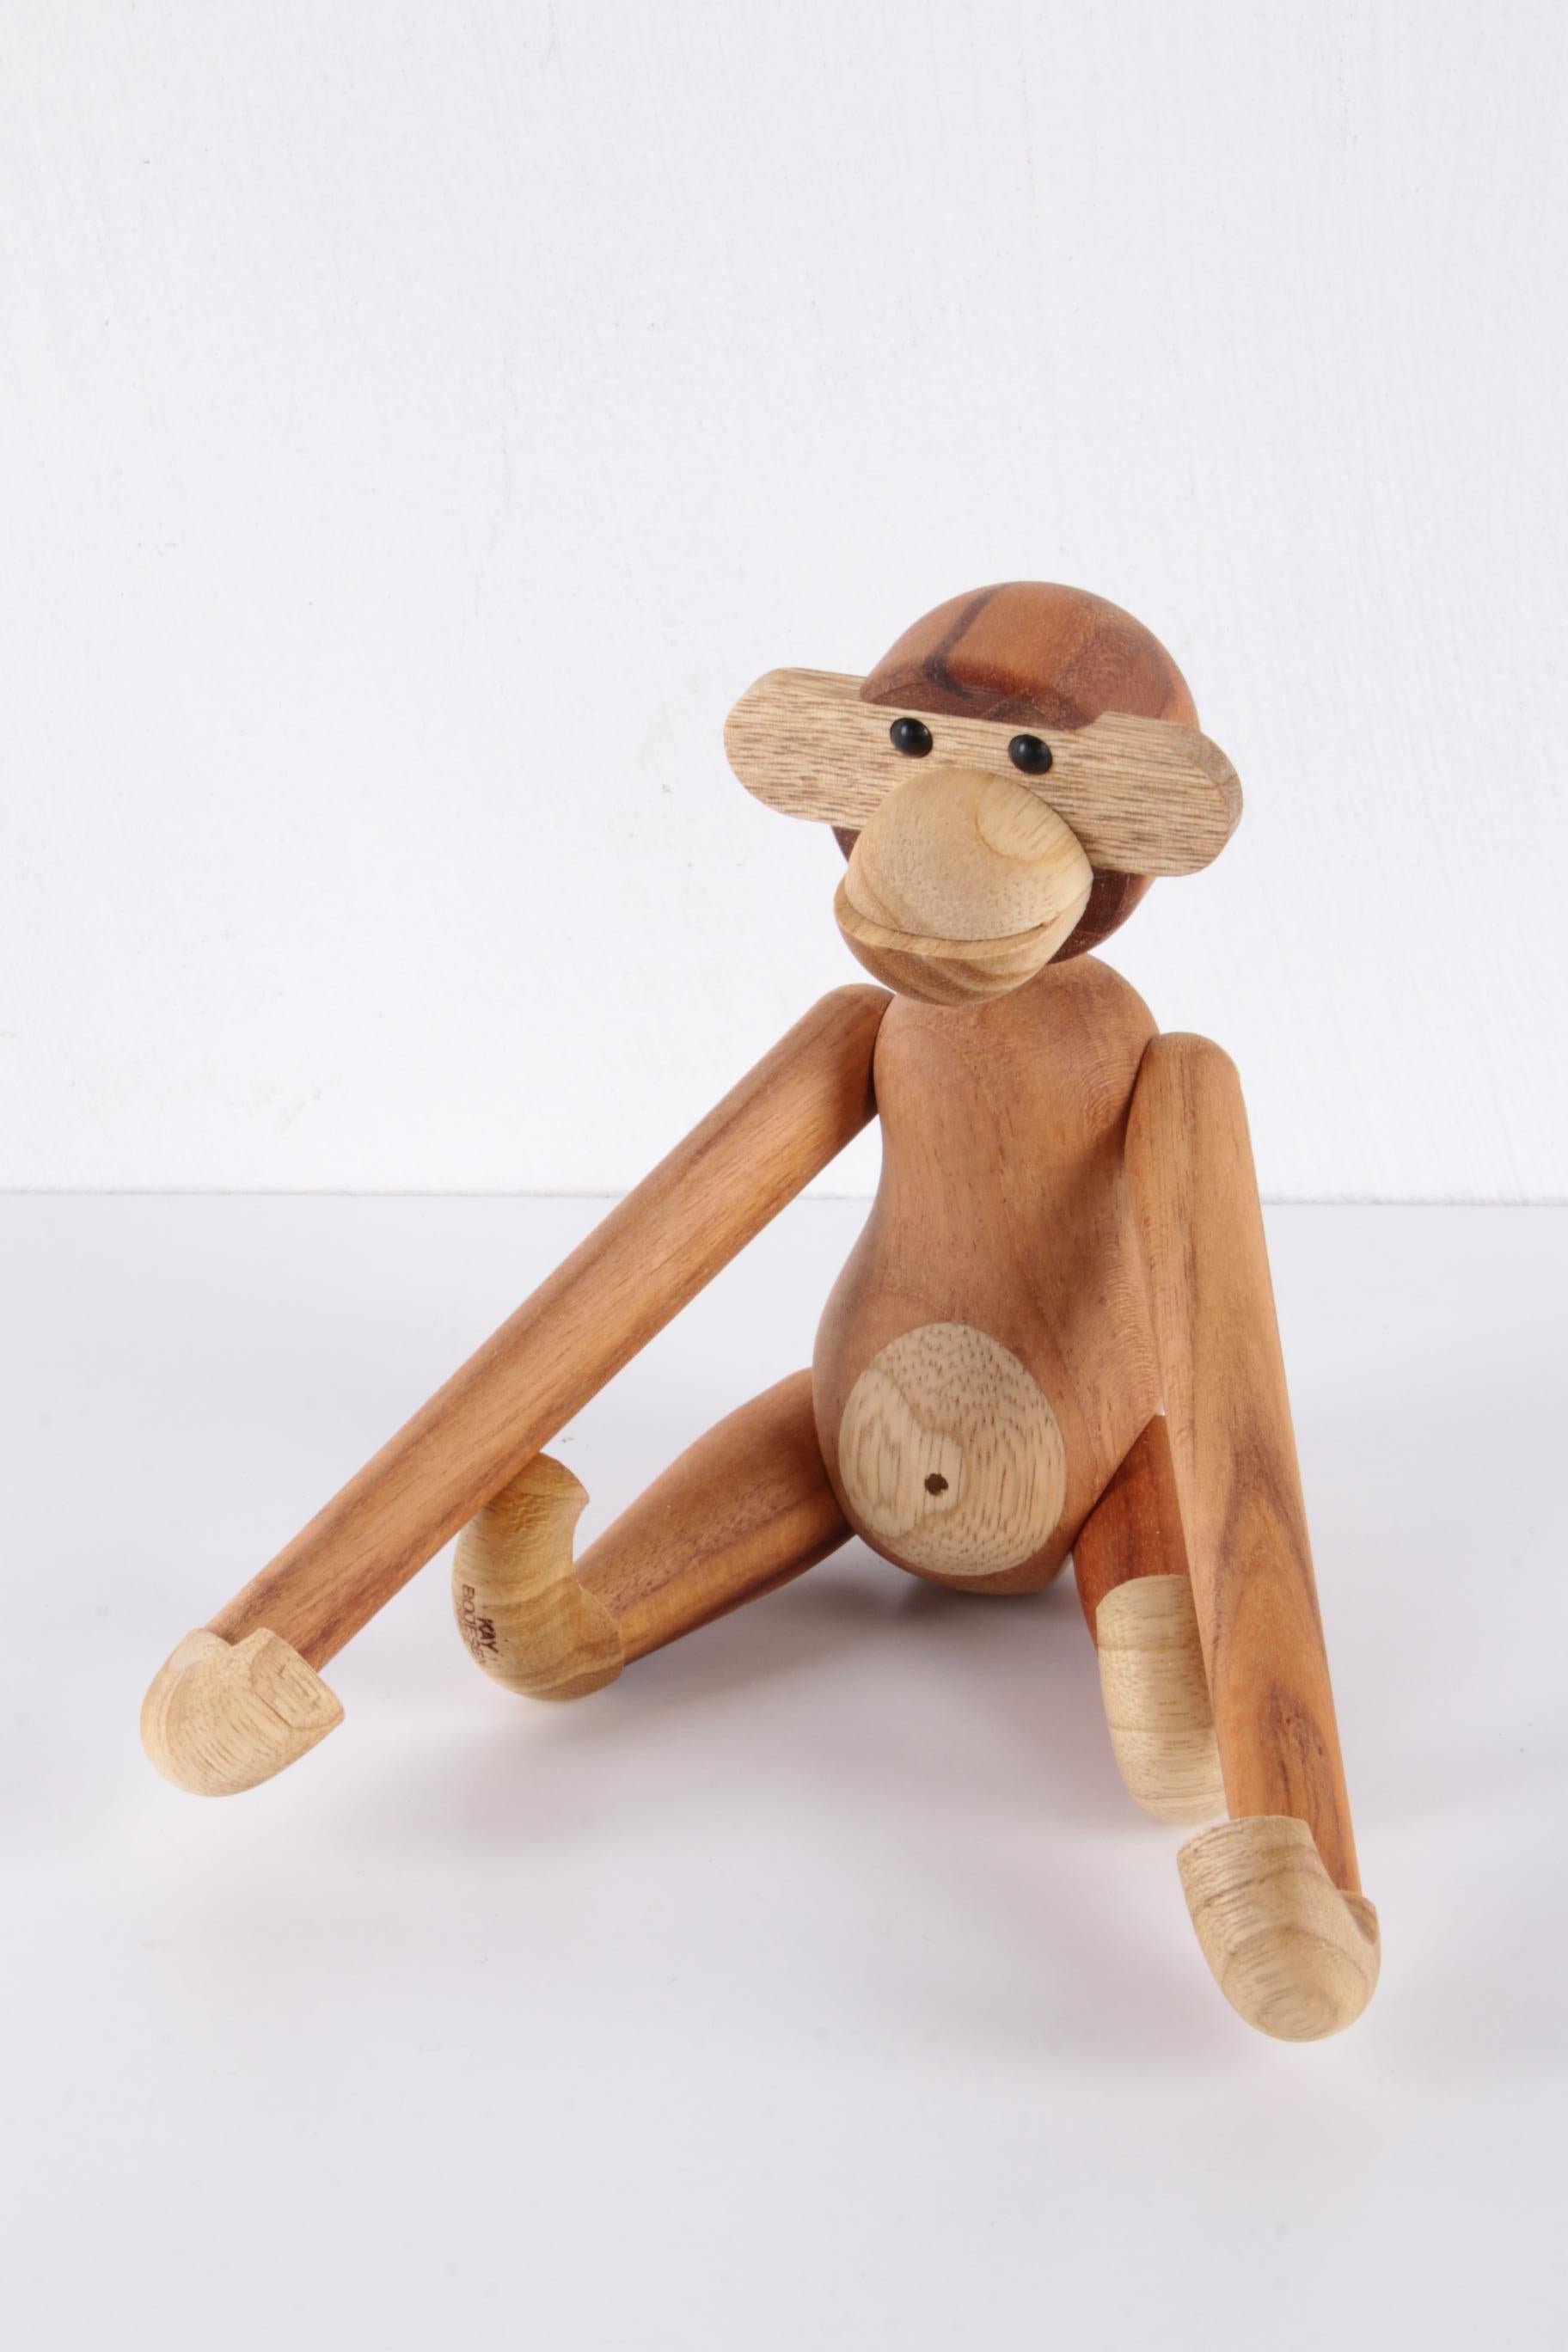 Original Kay Bojesen Monkey Monkey size Small


Kay Bojesens Monkey was born in Denmark in 1951 and is made of teak.

This monkey is size small when we put the arms up 28 cm in total.

From the head to the feet it is 20 cm. We pack this monkey in